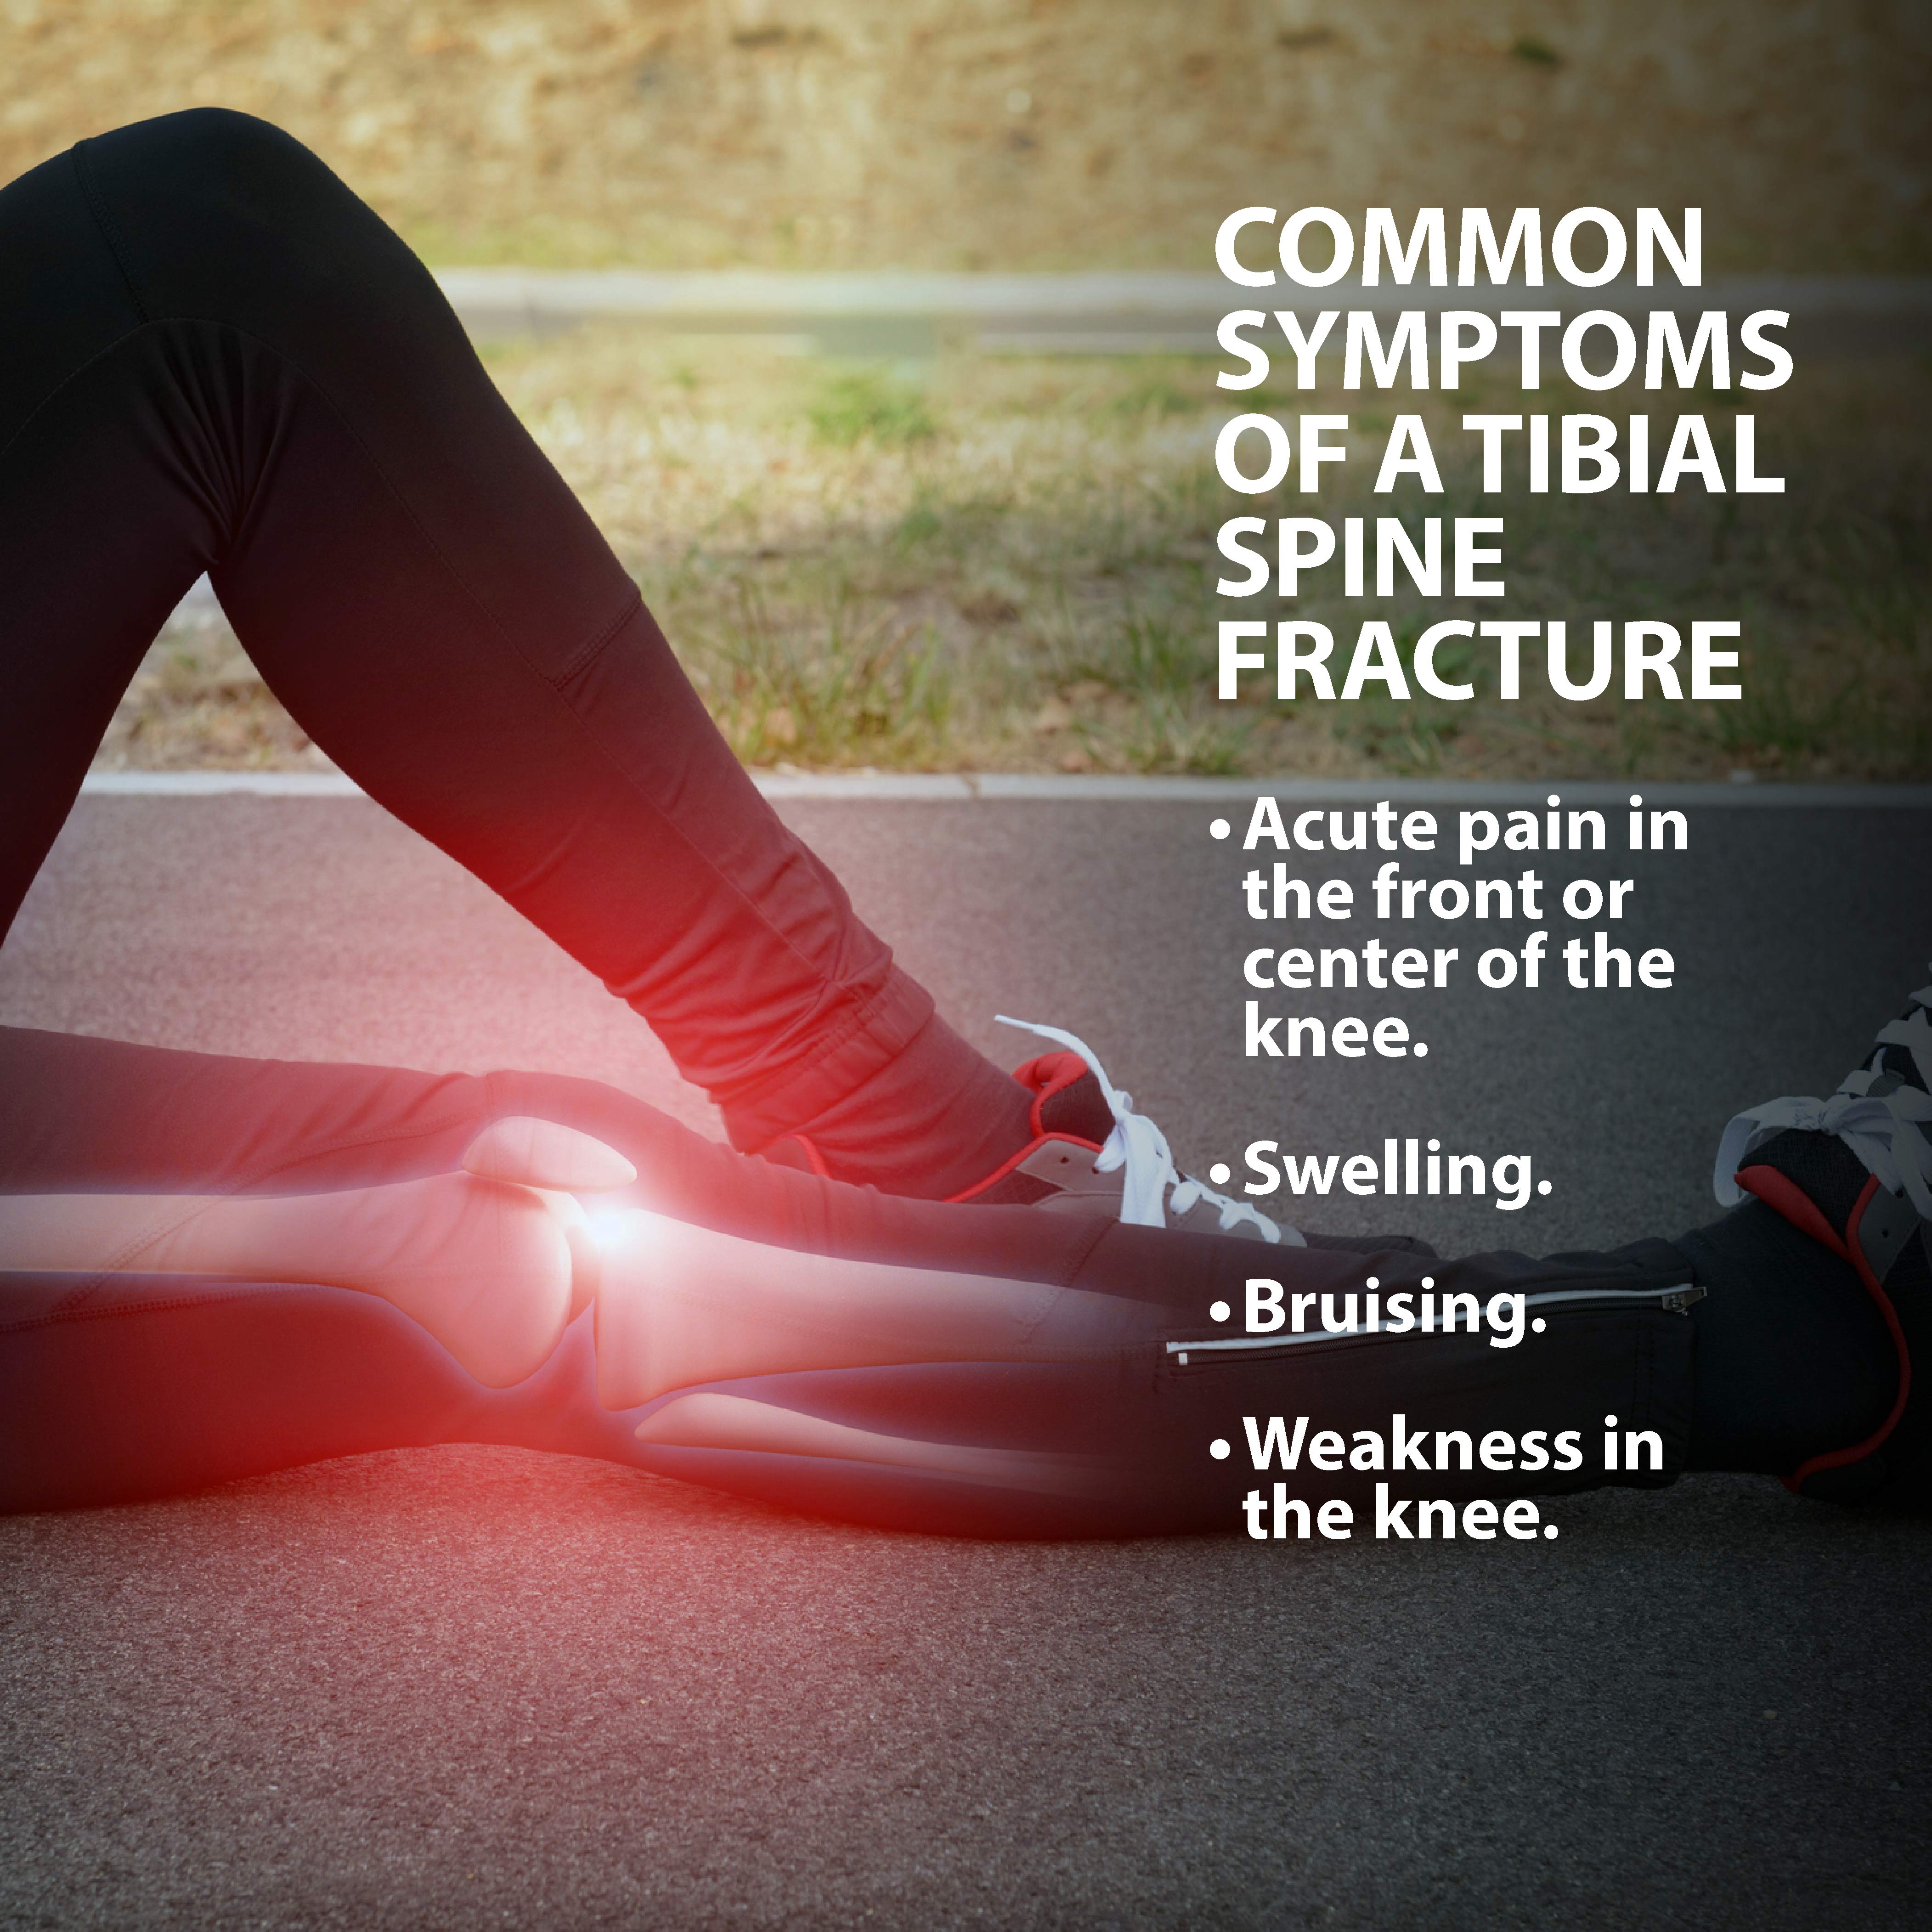 Tibial Spine Fracture Symptoms